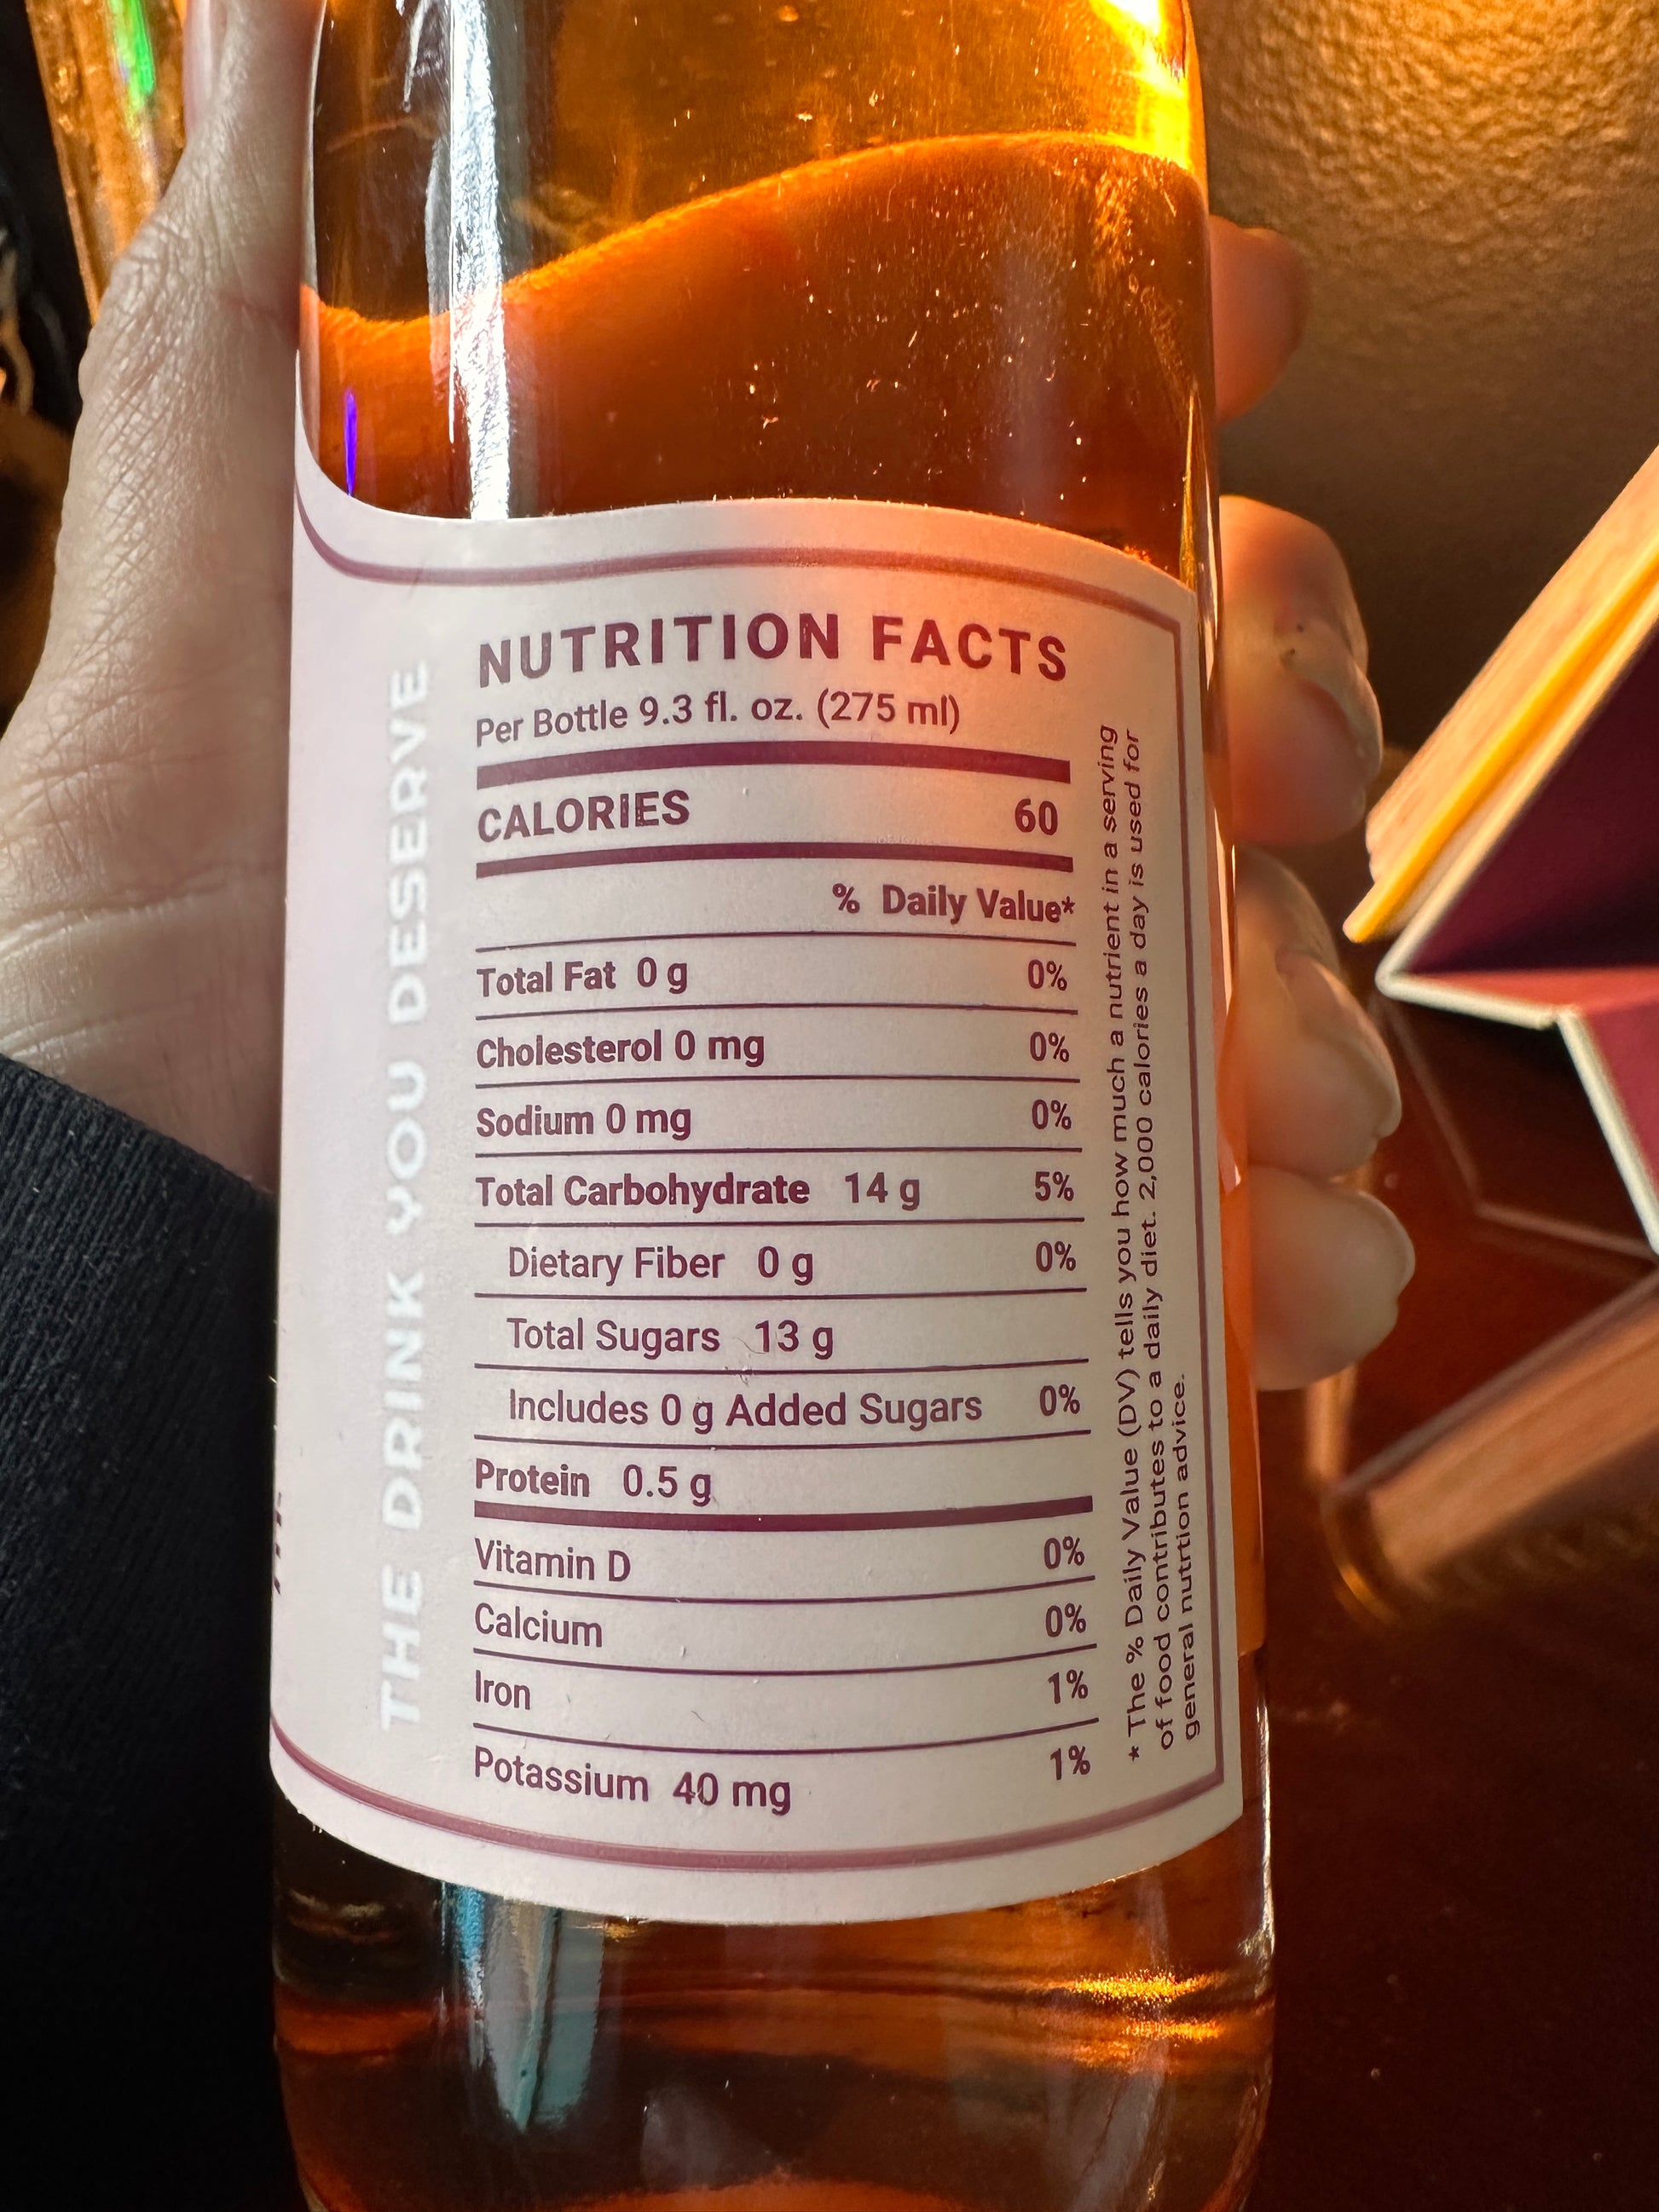 nutrition facts from a bottle of bubbly rose